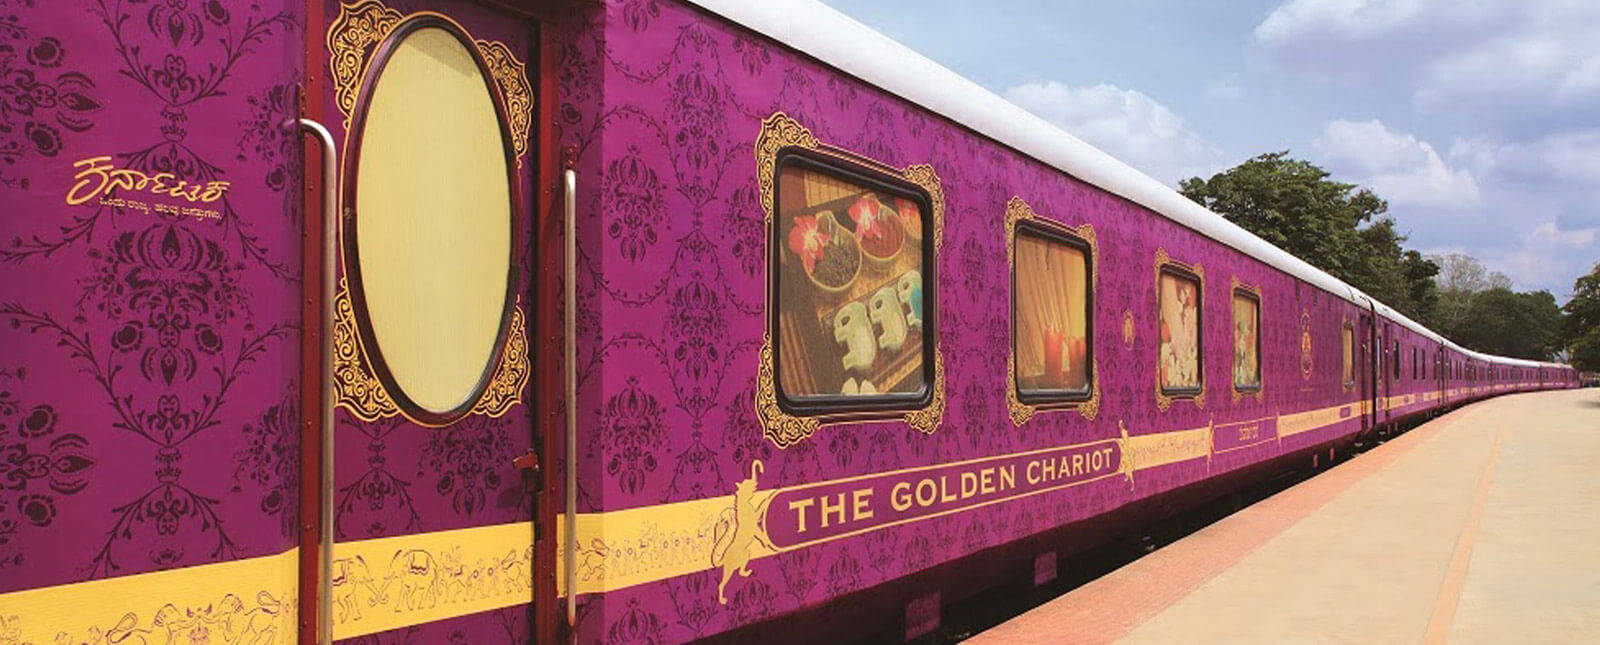 Luxurious Golden Chariot Train In India